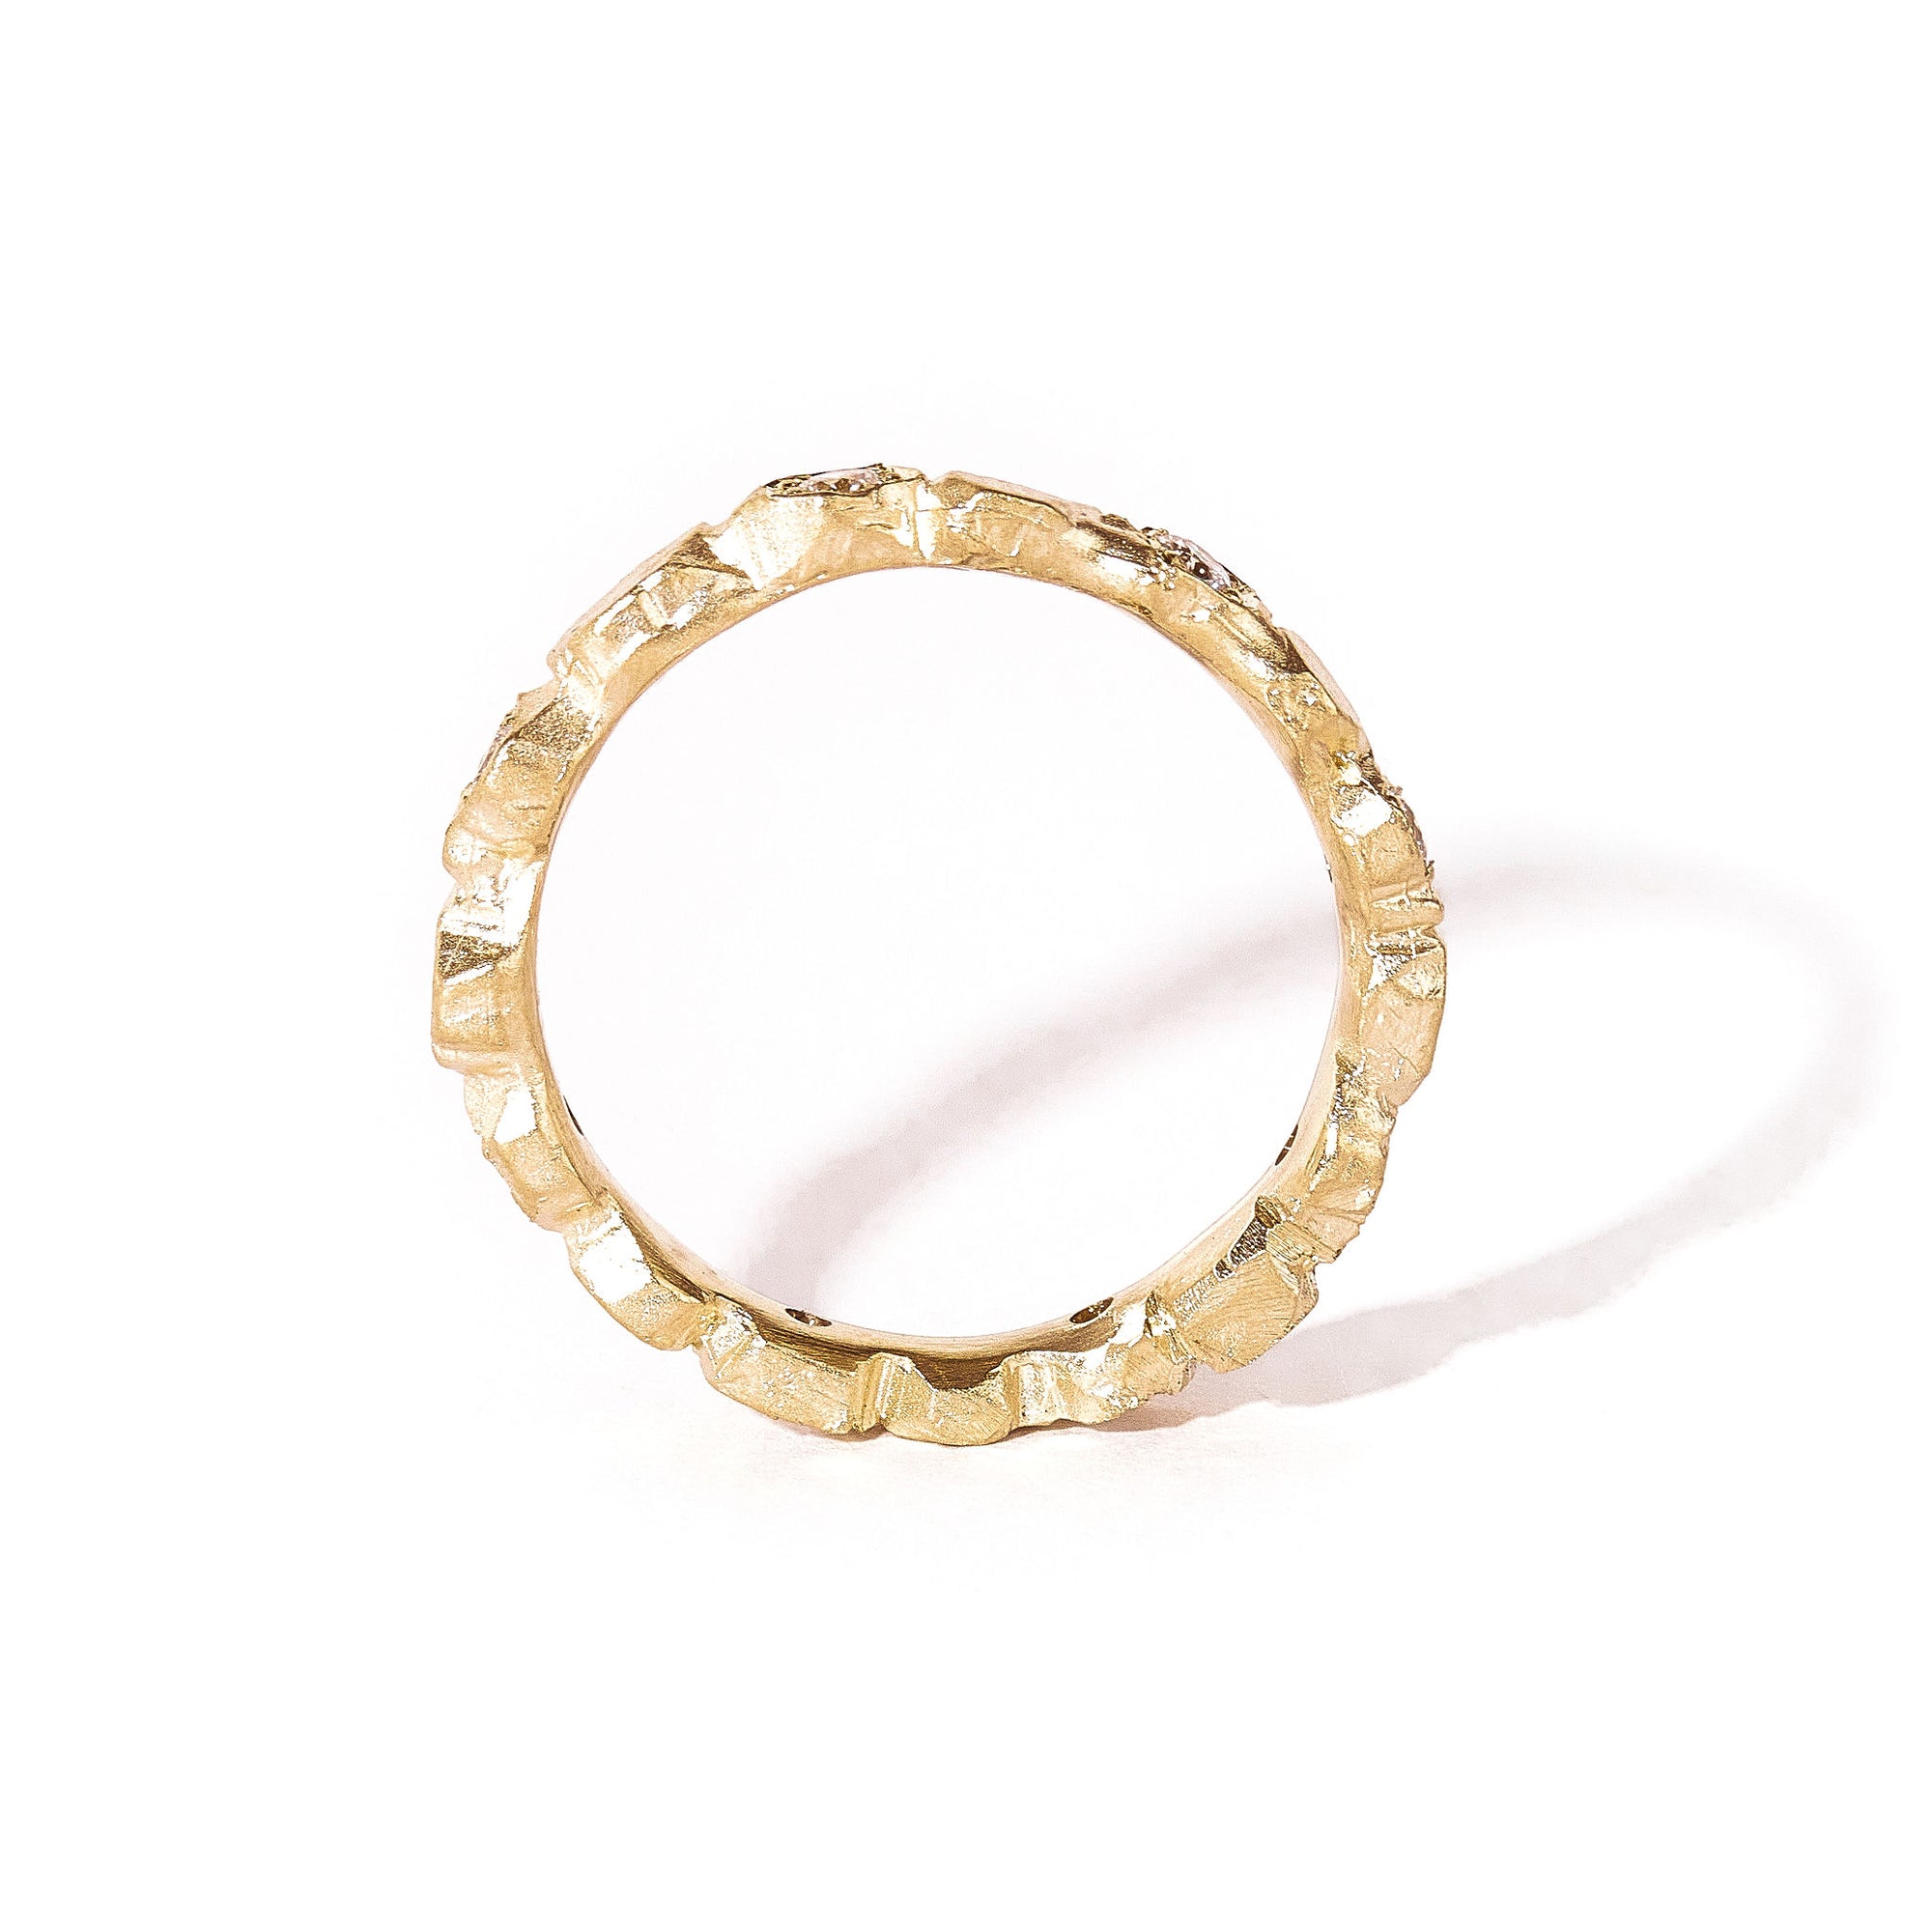 7 Stone Diamond Handcrafted Ring in 9ct Yellow Gold